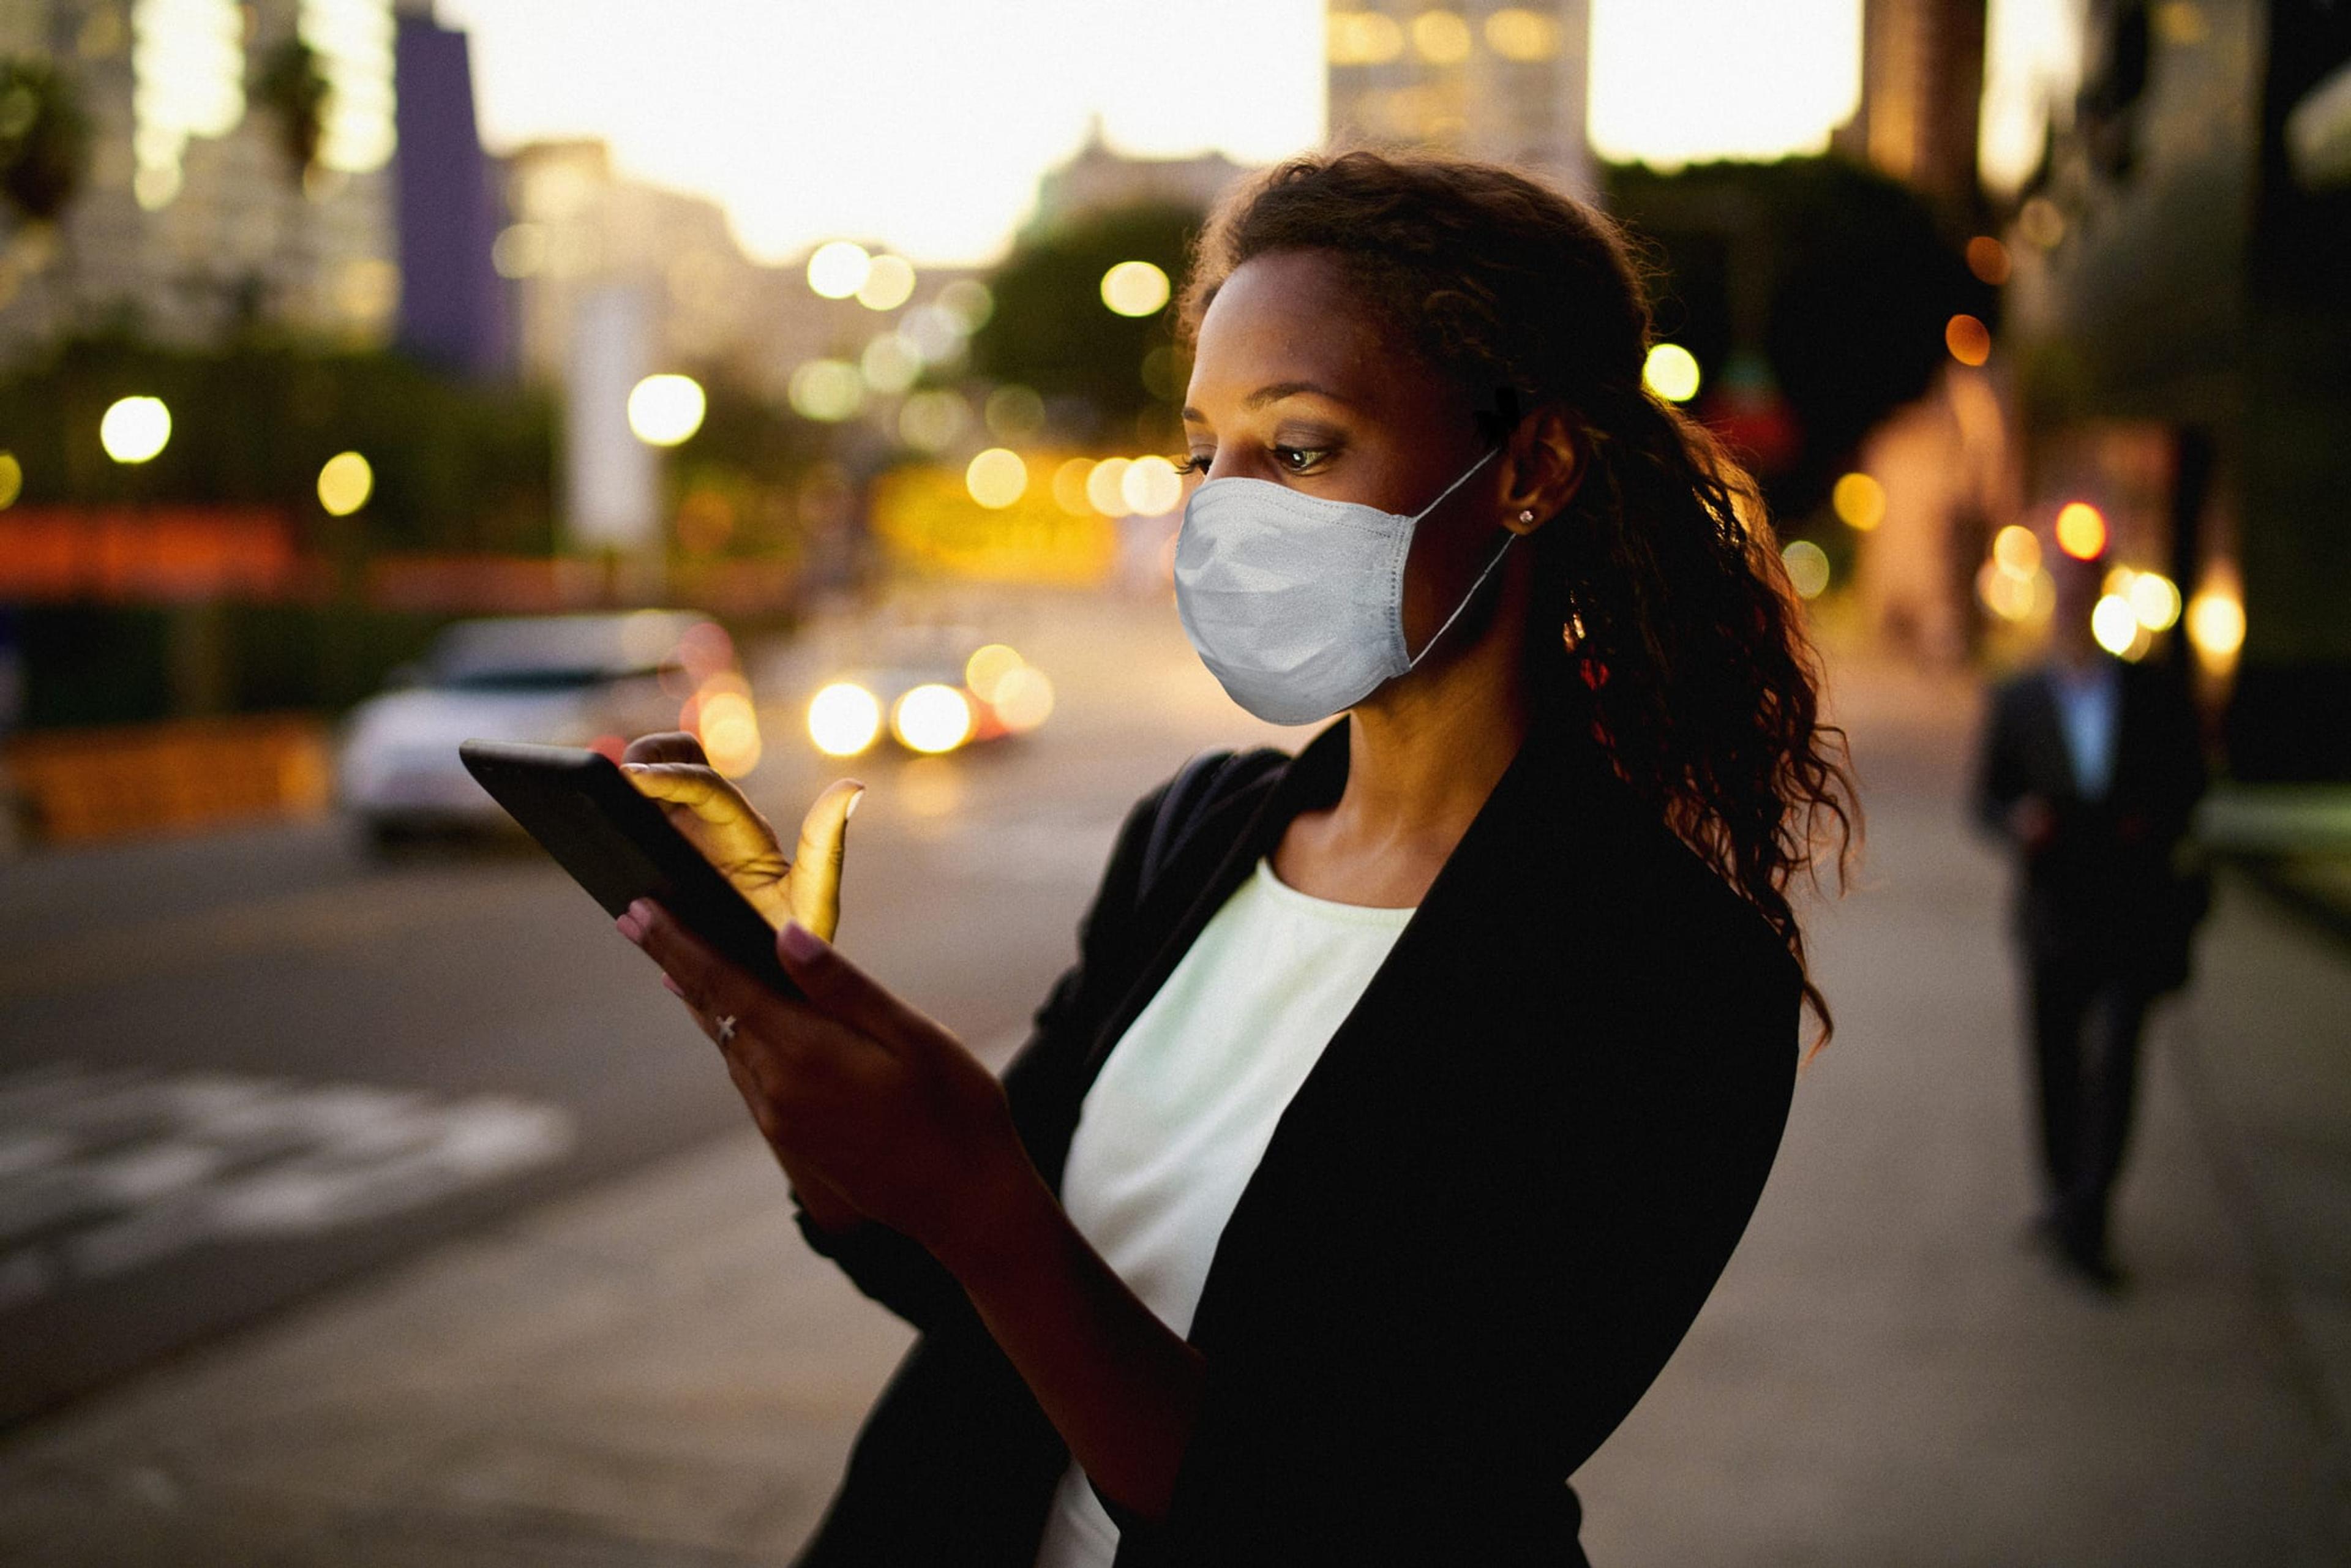 Woman wearing a mask looks at a tablet